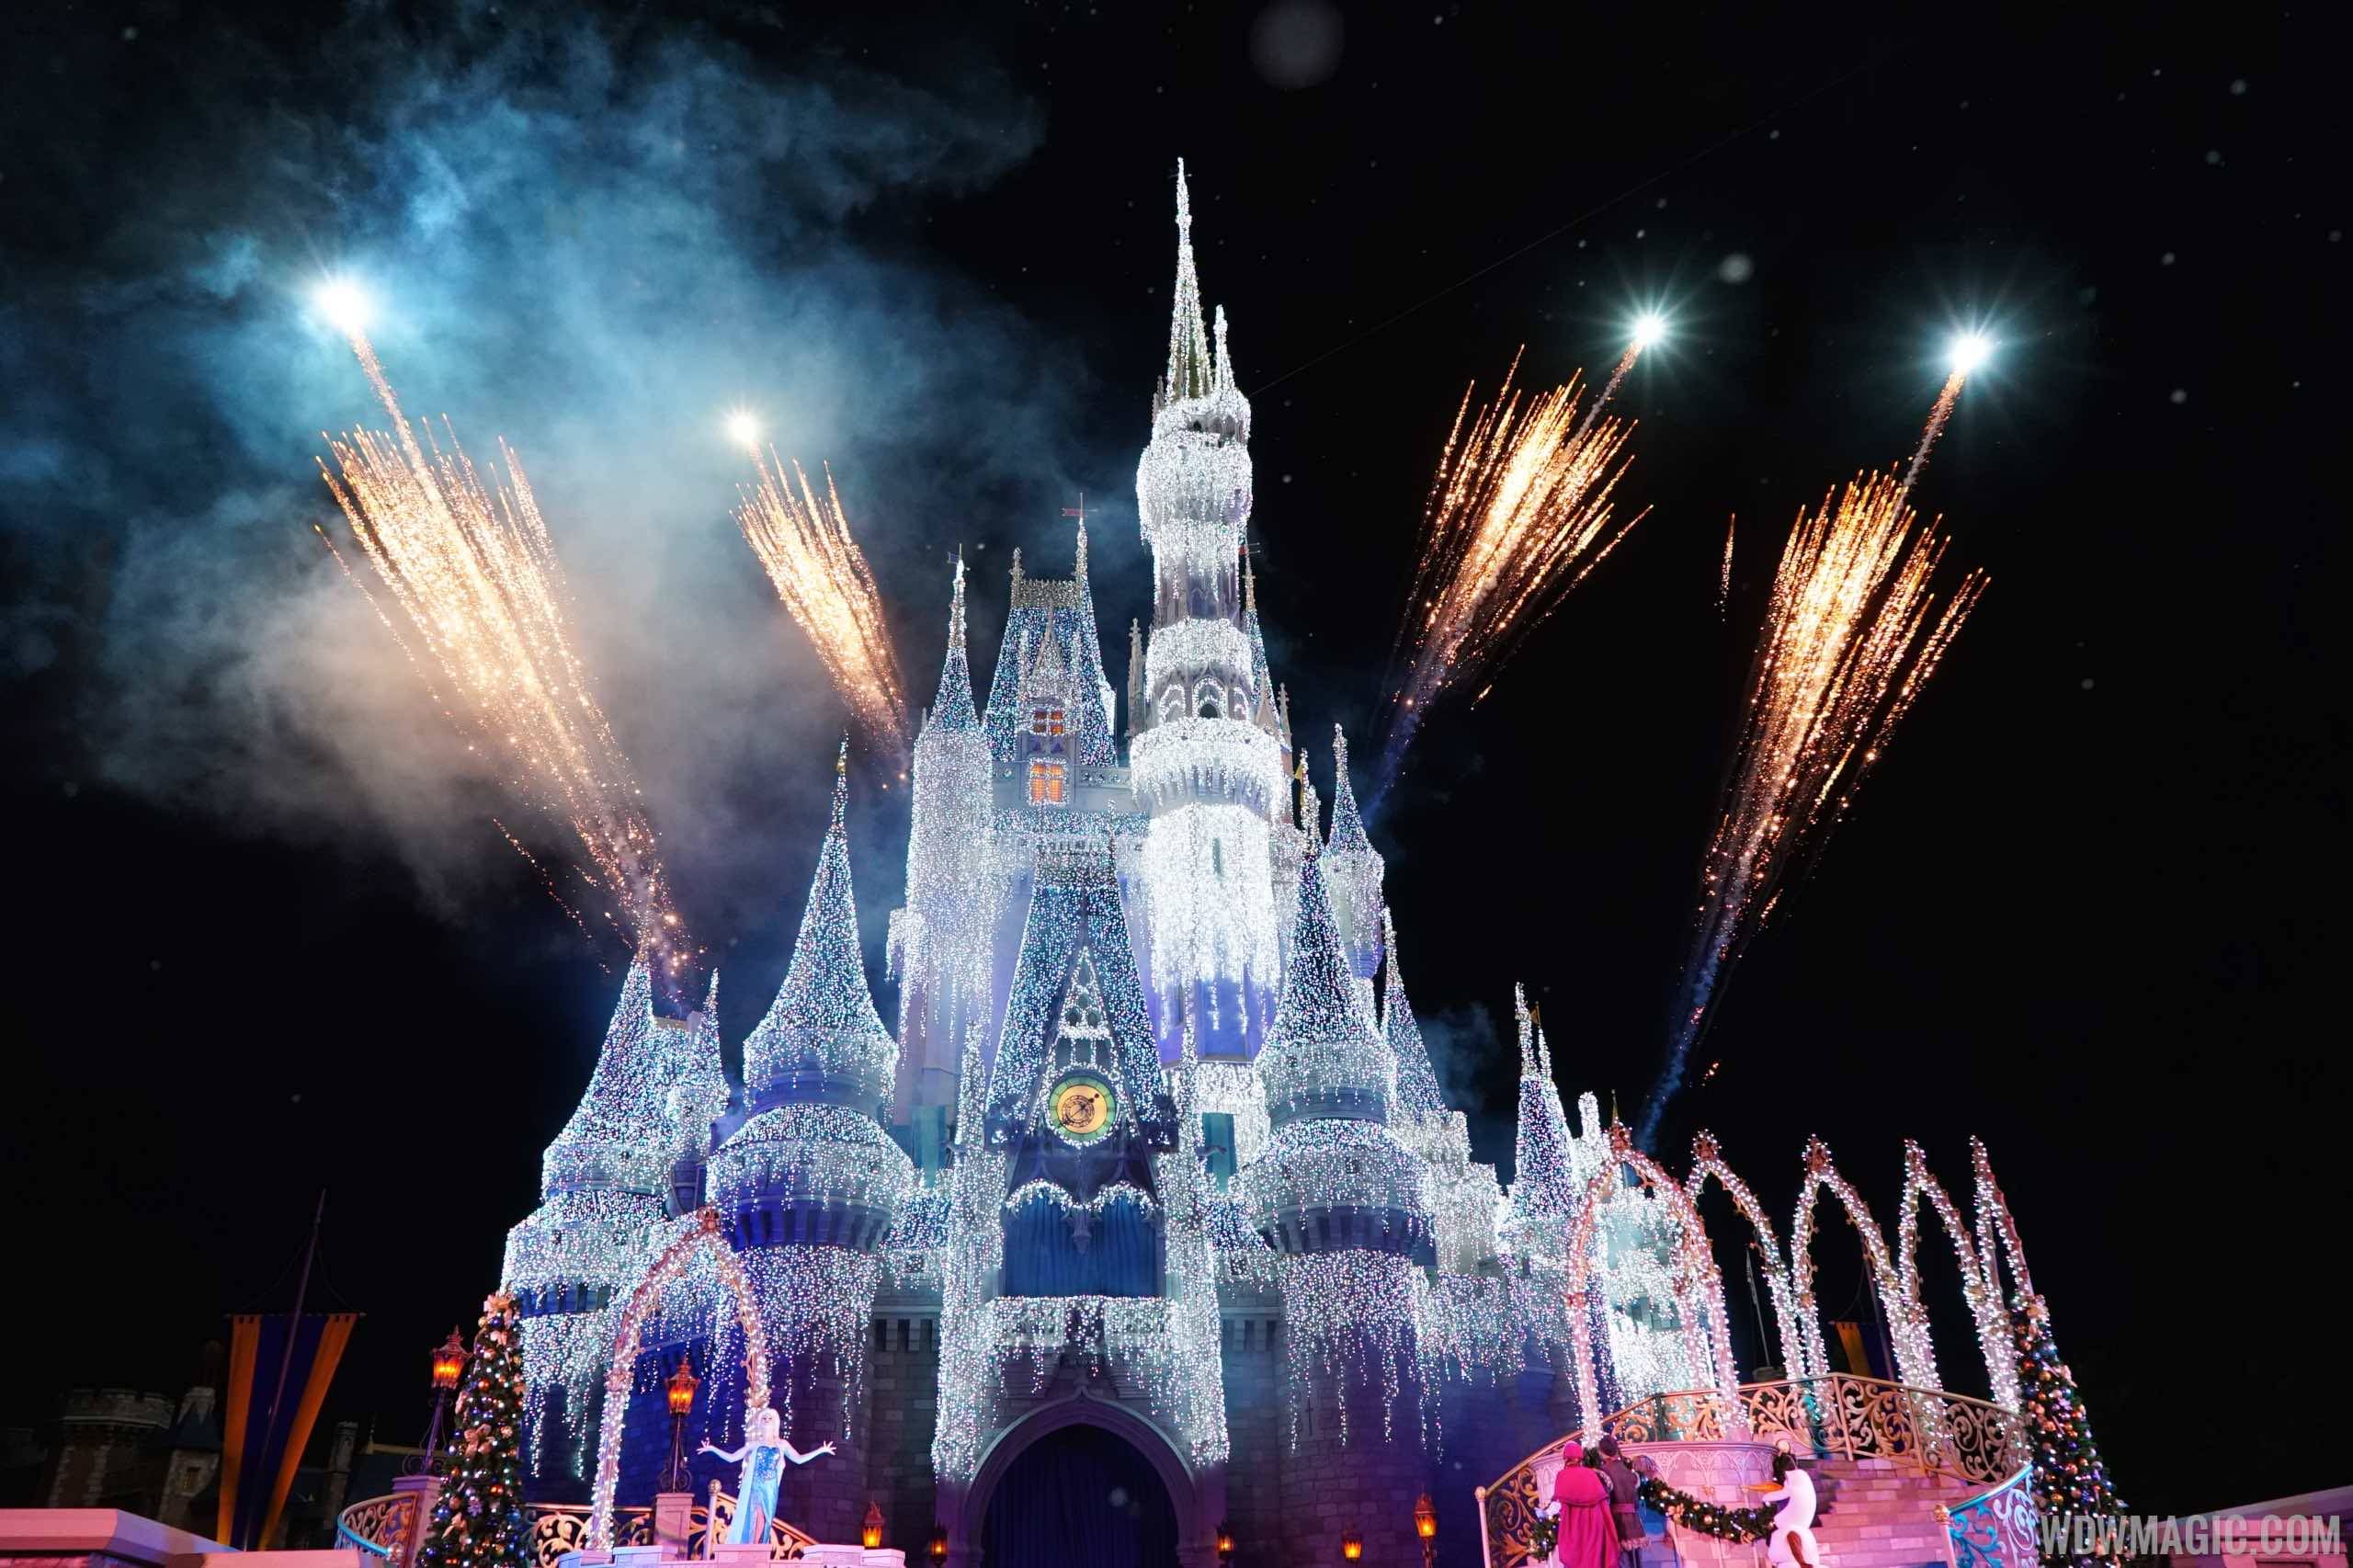 The spectacular Castle Dreamlights are not returning for 2022